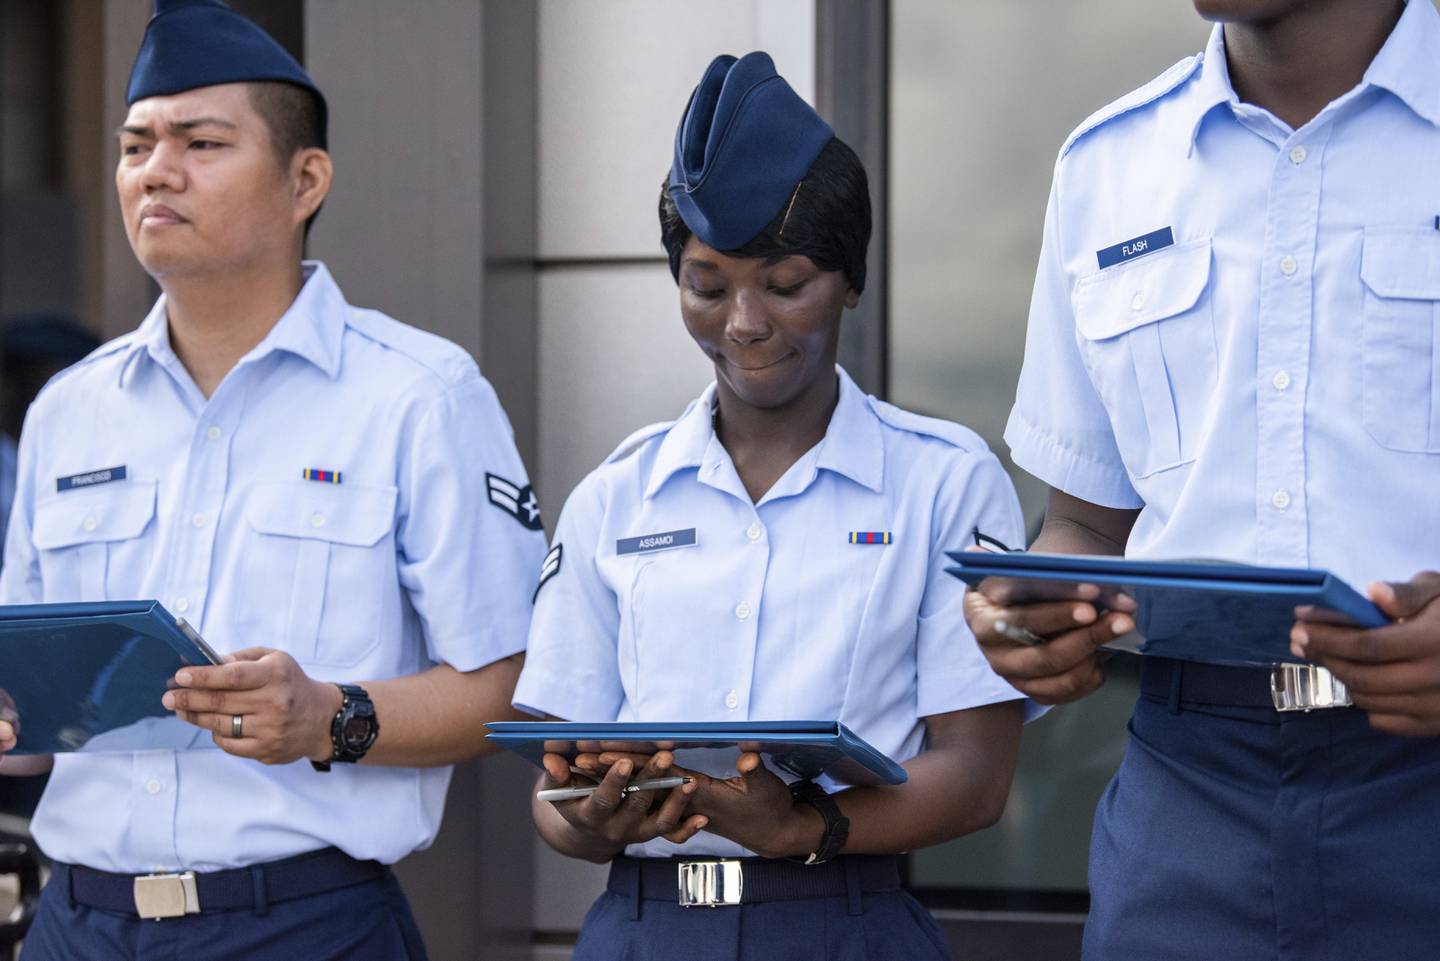 Airman 1st Class Joshua Fancisco, from the Philippines, left, Airman 1st Class D'elbrah Assamoi, from Cote D'Ivoire, center, and Airman 1st Class Jordan Flash, from Jamaica, looks at their U.S. Certificate of Citizenship after signing it following the Basic Military Training Coin Ceremony on April 26, 2023, at Joint Base San Antonio-Lackland, Texas.